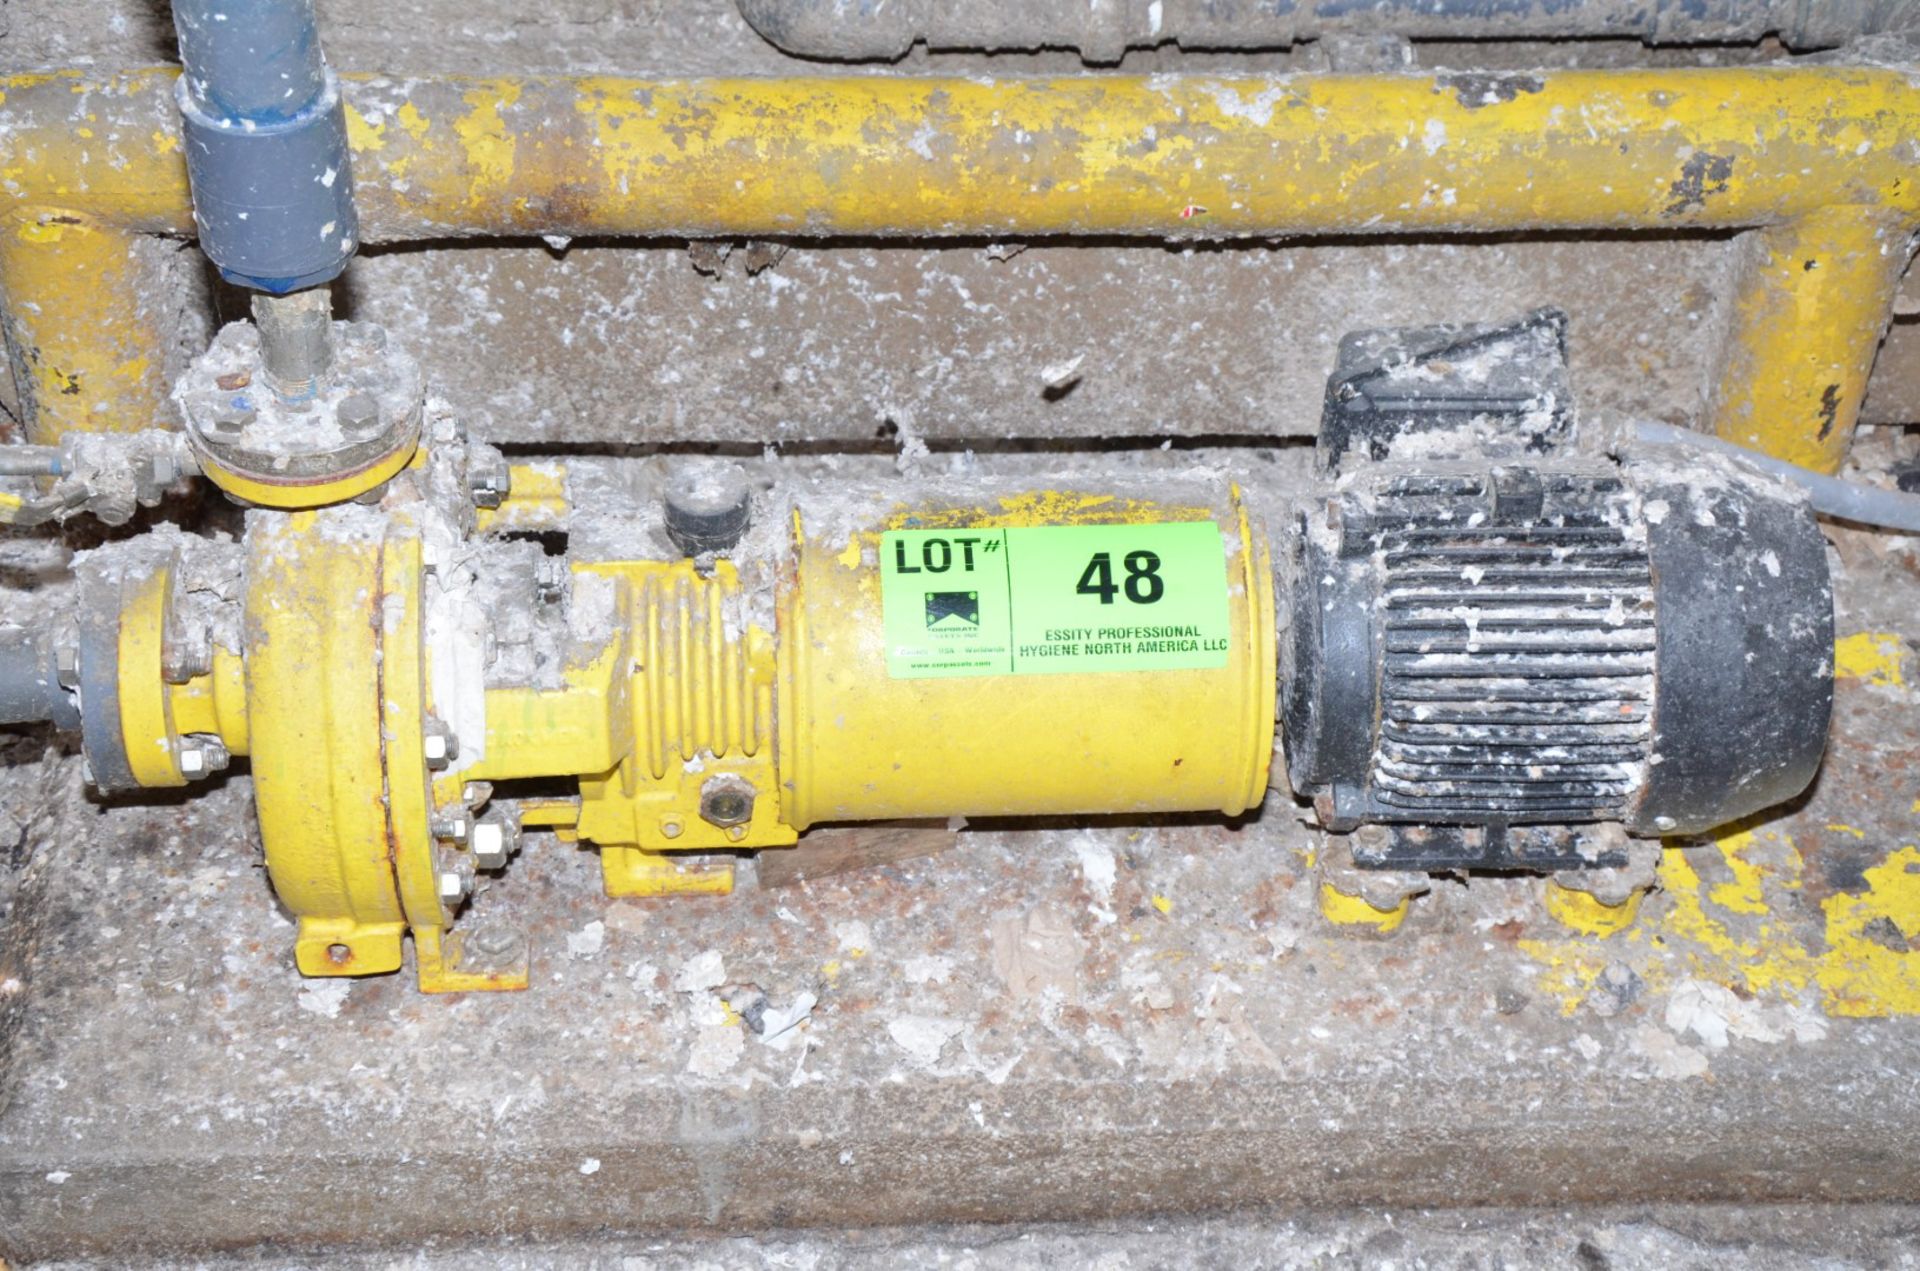 MFG UNKNOWN CENTRIFUGAL PUMP WITH ELECTRIC MOTOR, (CI) [RIGGING FEE FOR LOT #48 - $200 USD PLUS